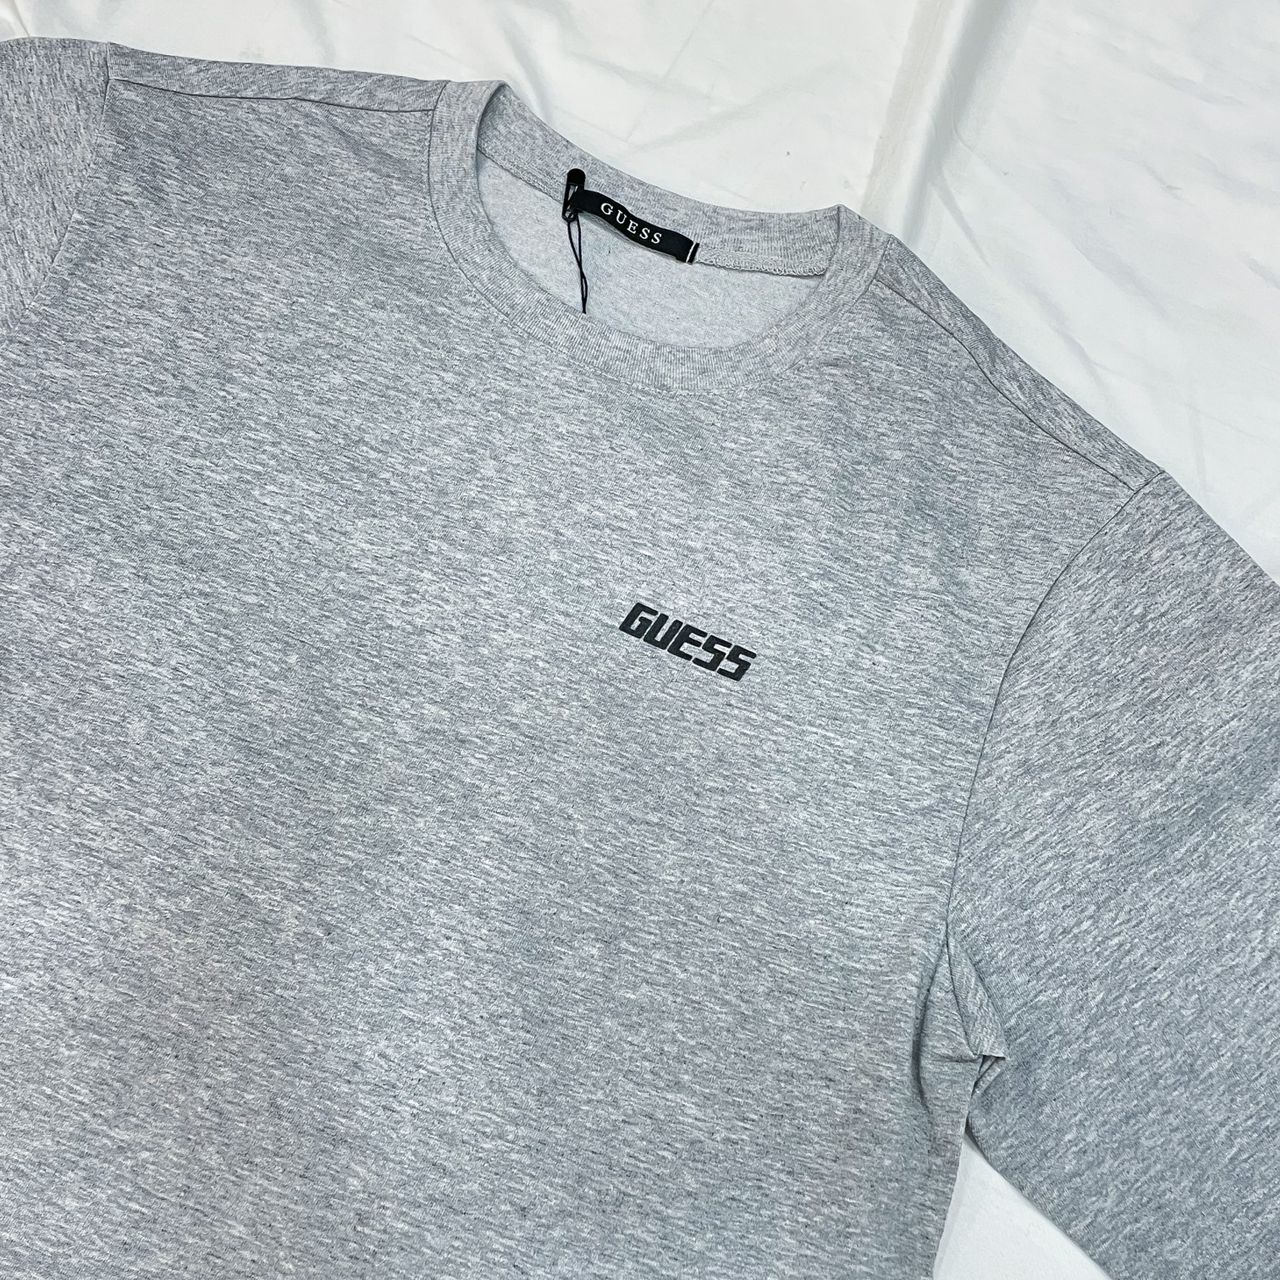 Guess Embroidered Chest Wording Logo Tee - Grey